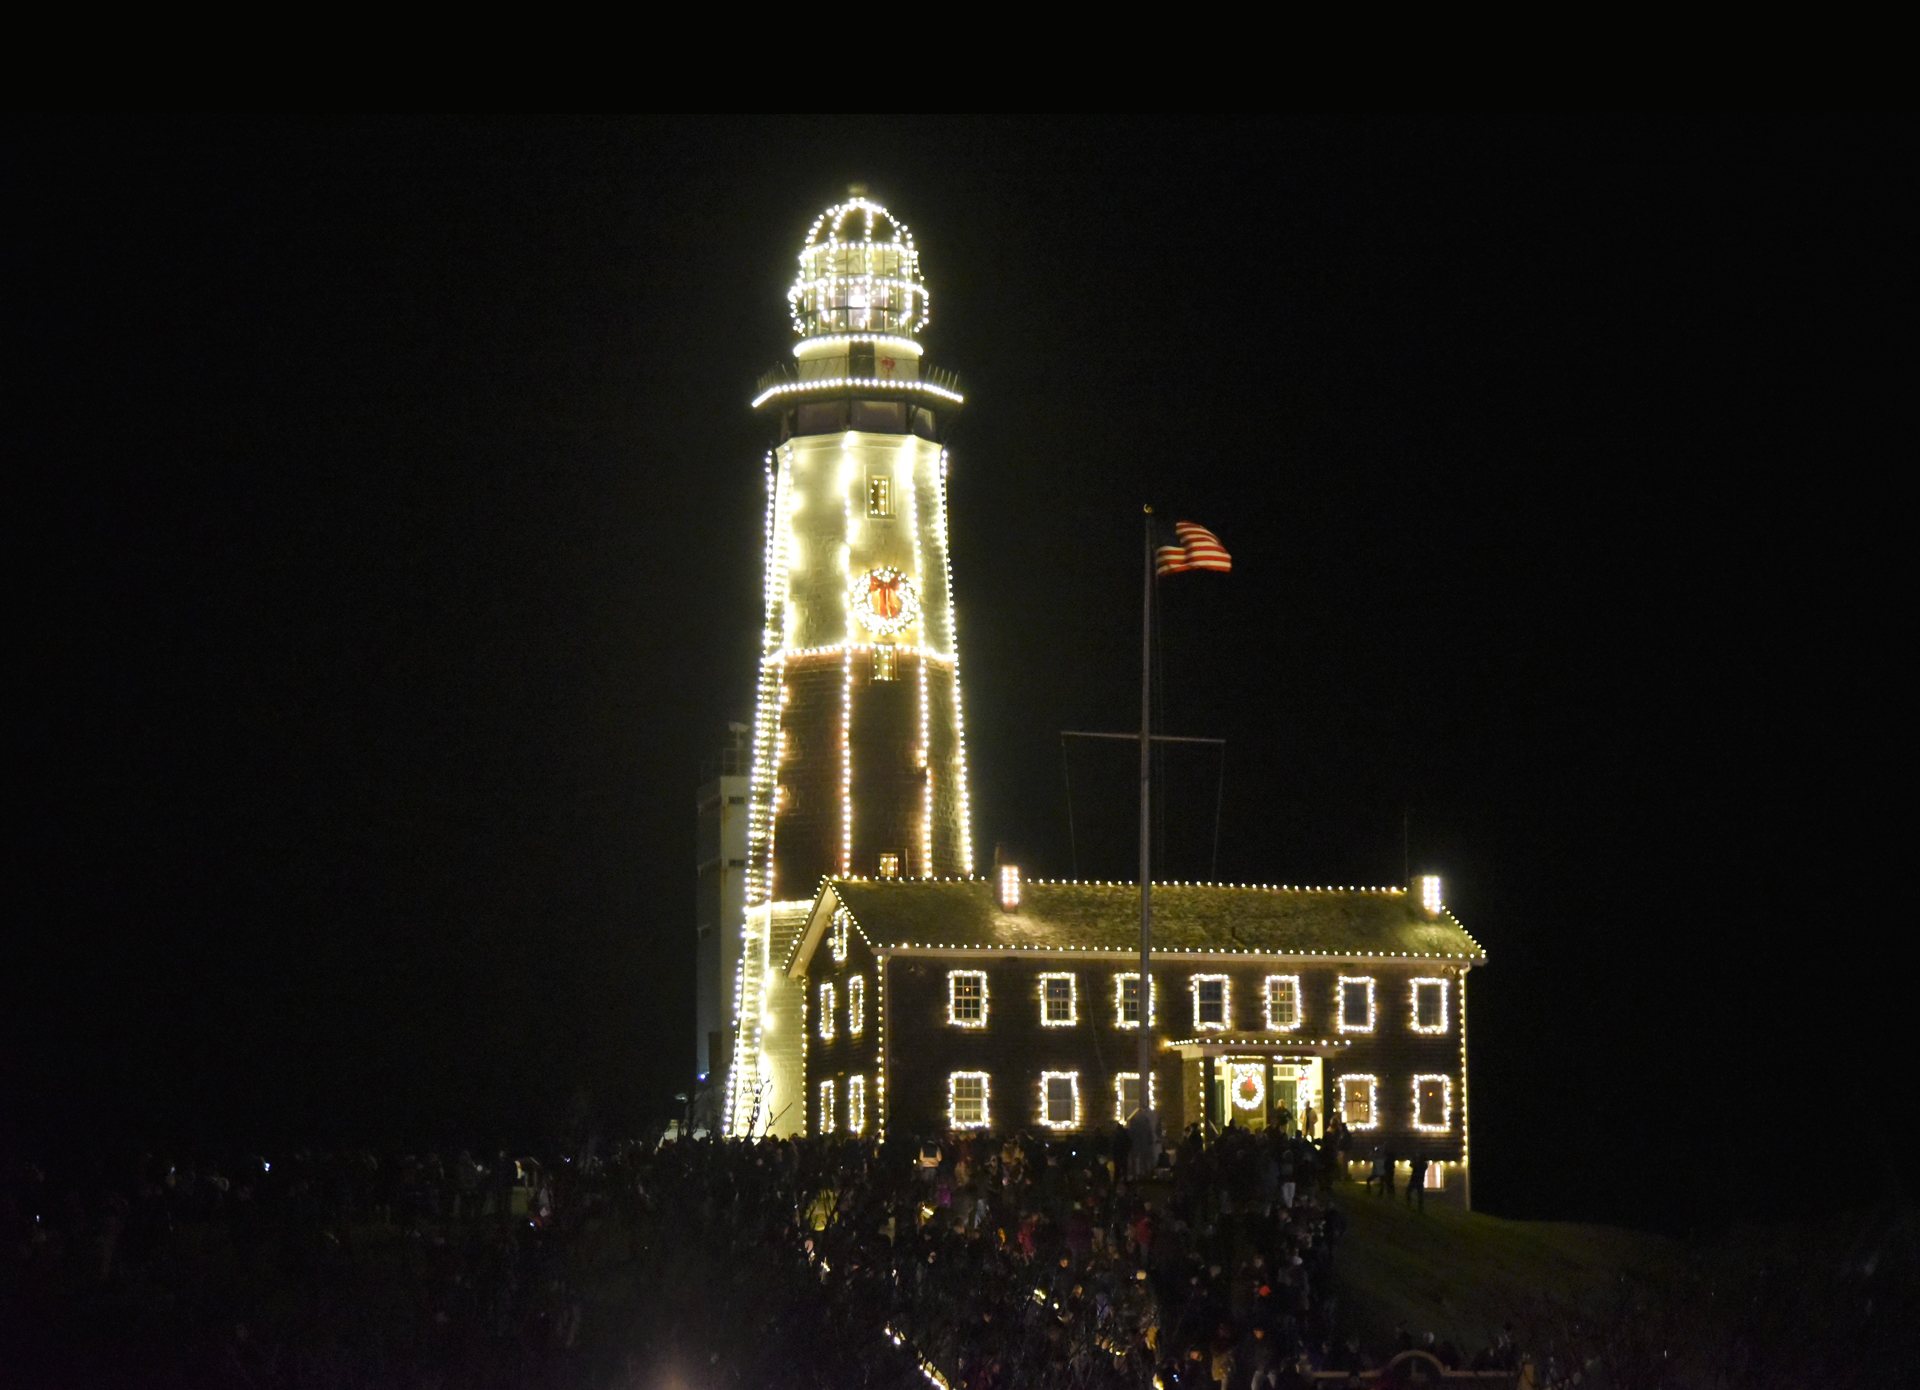 The Montauk Lighthouse lit up for the holidays in the Hamptons